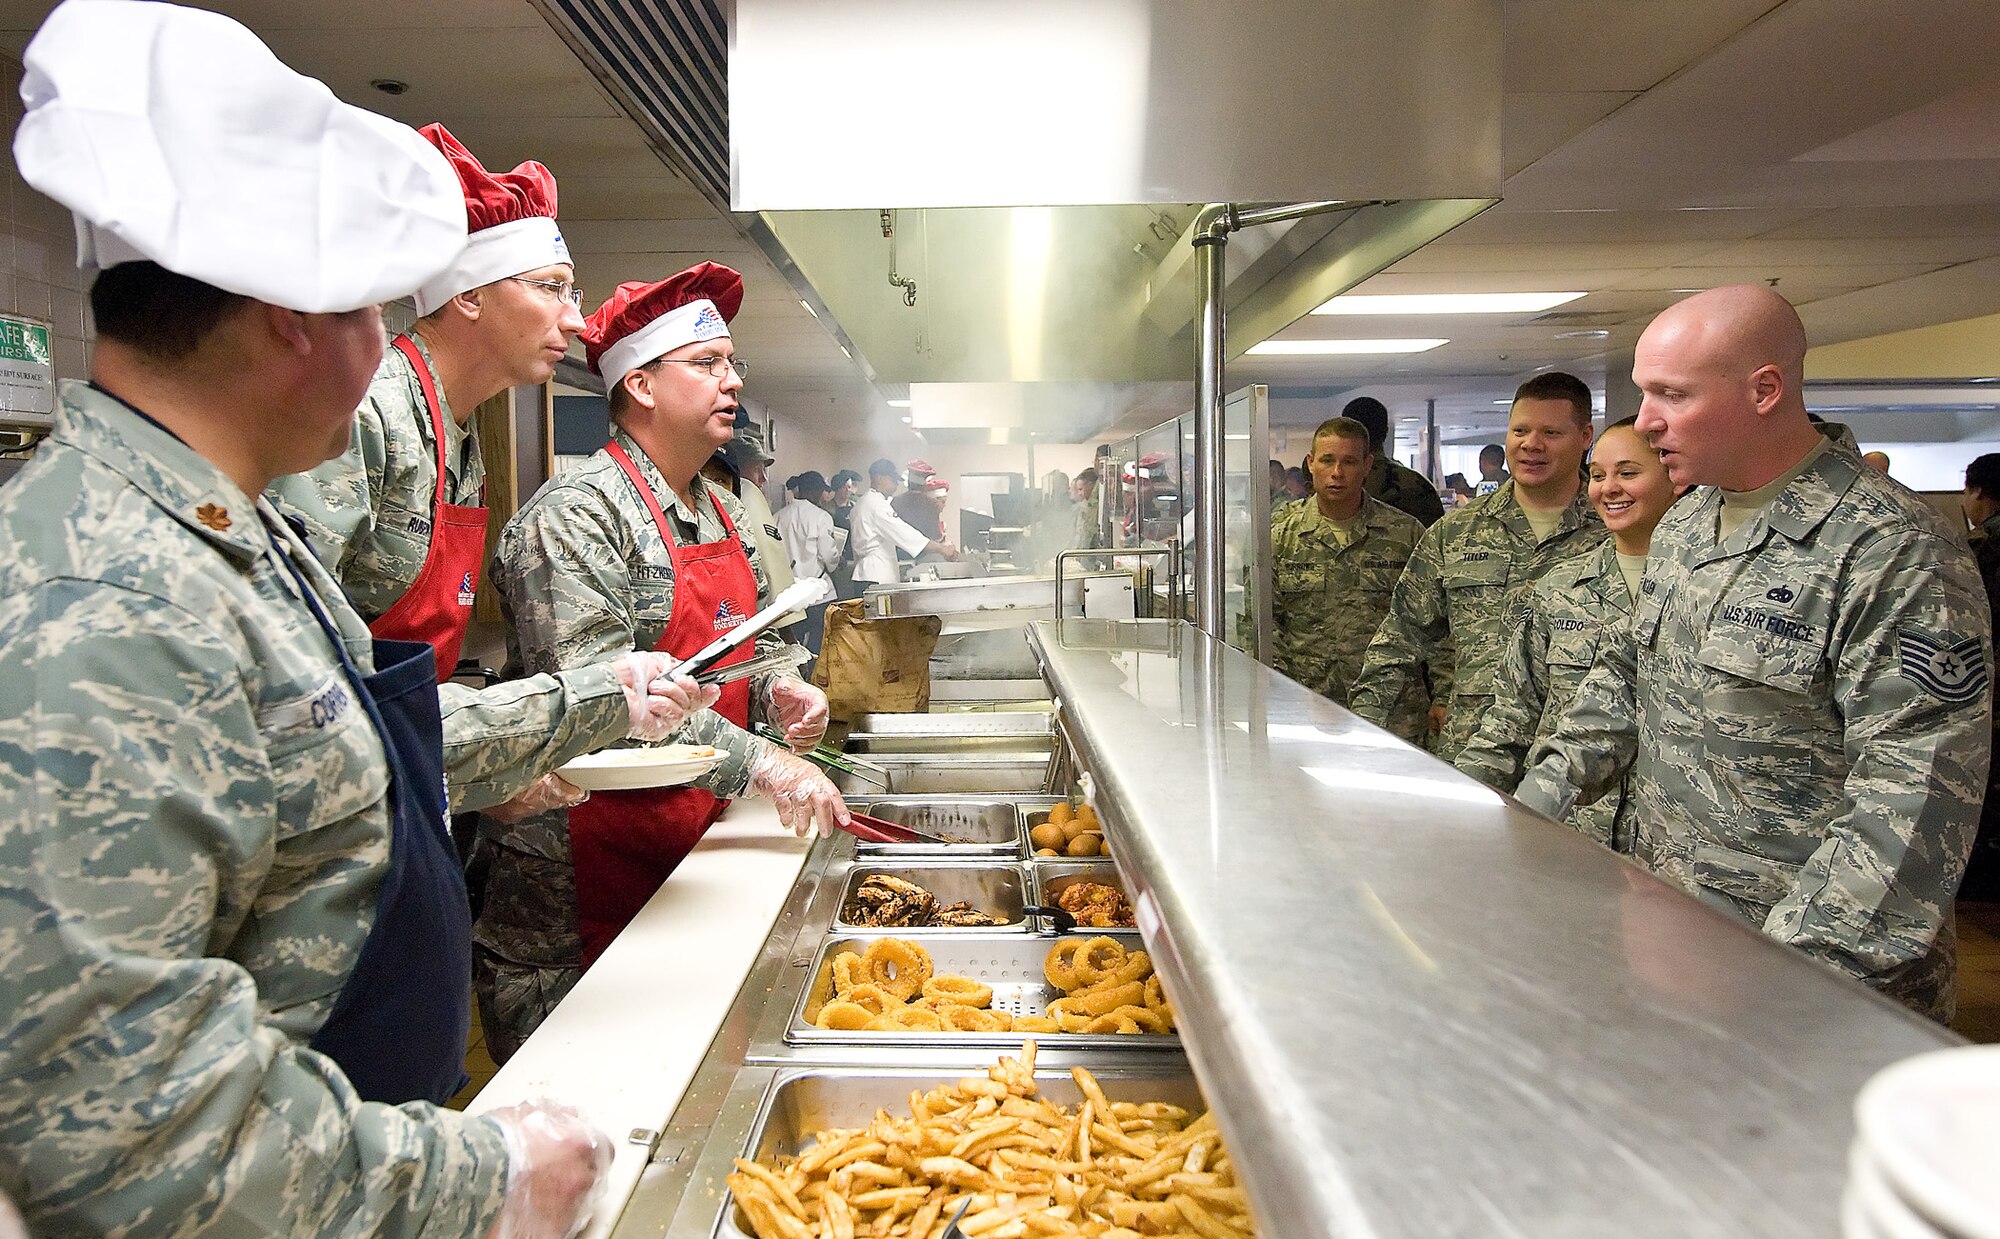 Maj. Gen. James T. Rubeor, 22nd Air Force commander, and Col. Michael T. Fitzhenry, 512th Airlift Wing commander, serve lunch to Reserve Airmen at the Patterson Dining Facility here Nov. 7. General Rubeor visited the Liberty Wing Nov. 5-8. (U.S. Air Force photo/Roland Balik)